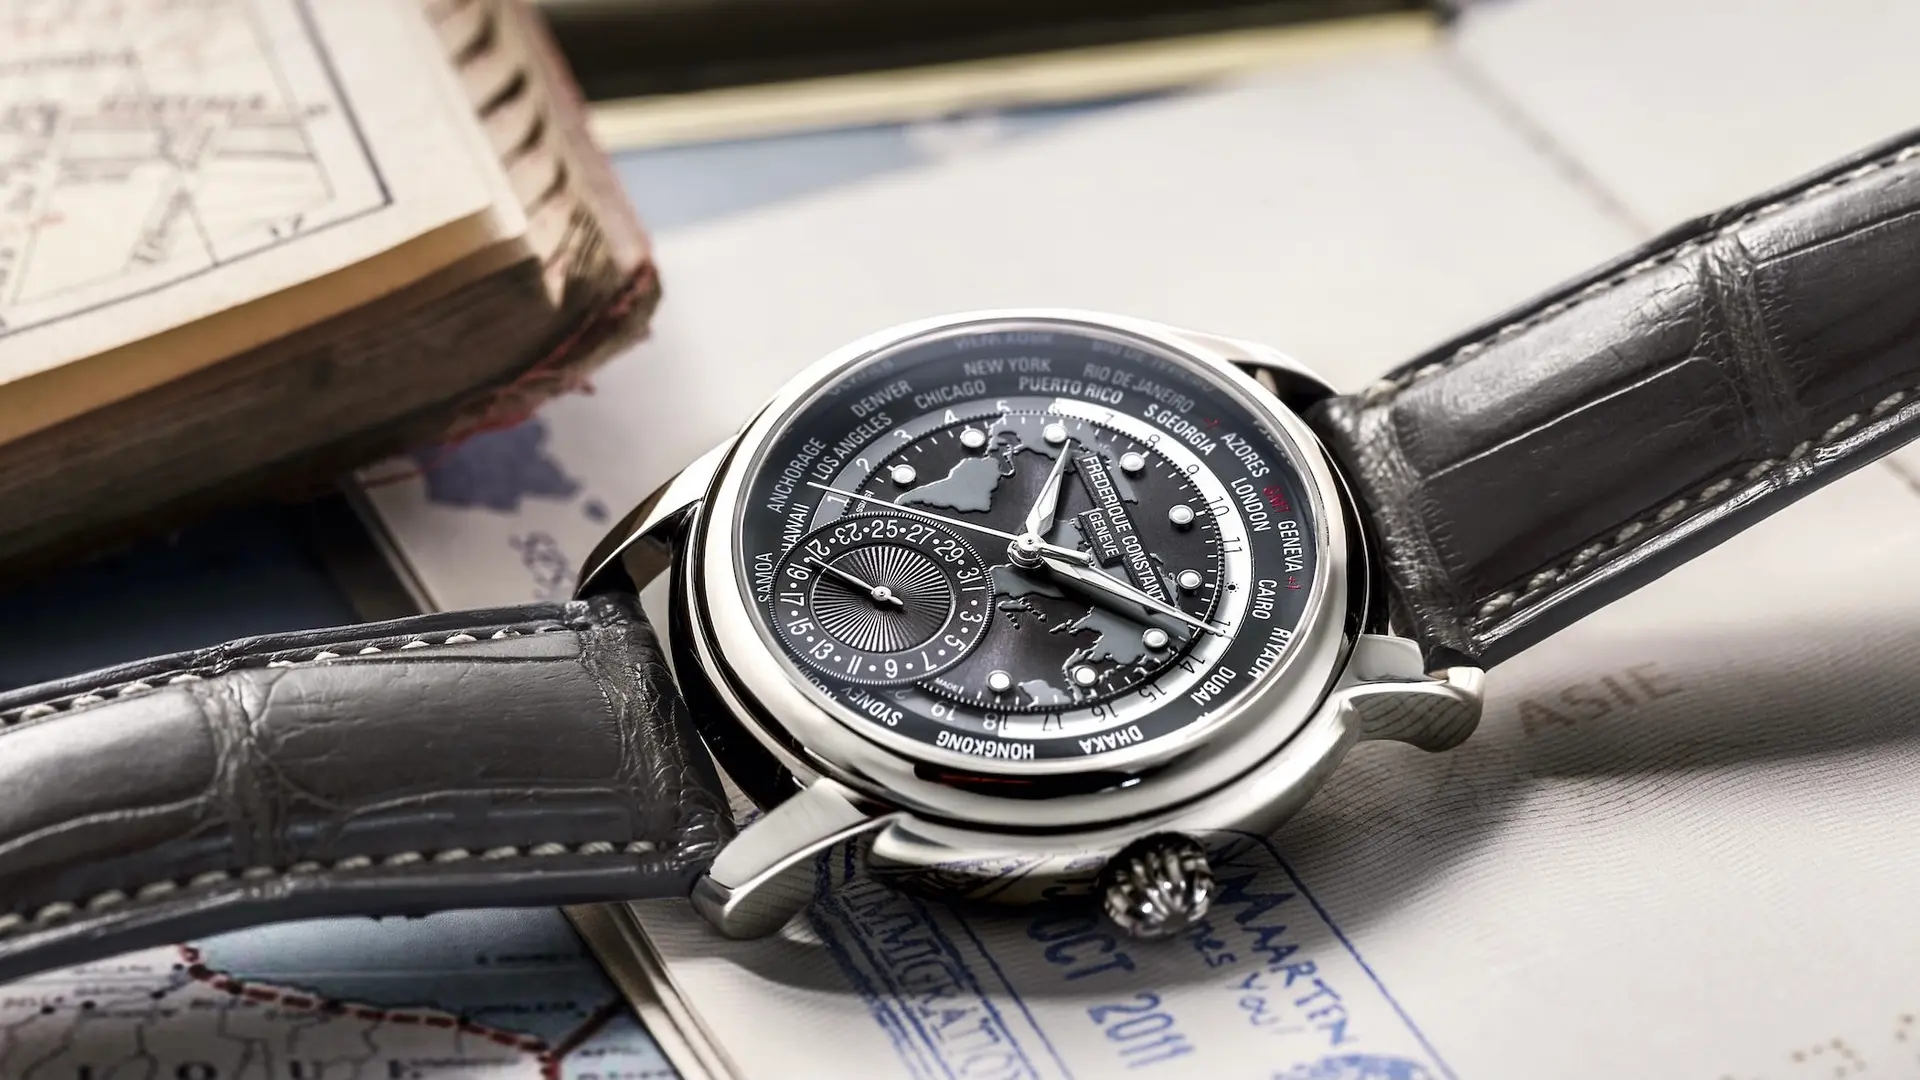 Lifestyle Articles - Ten of the Best Travel Watches